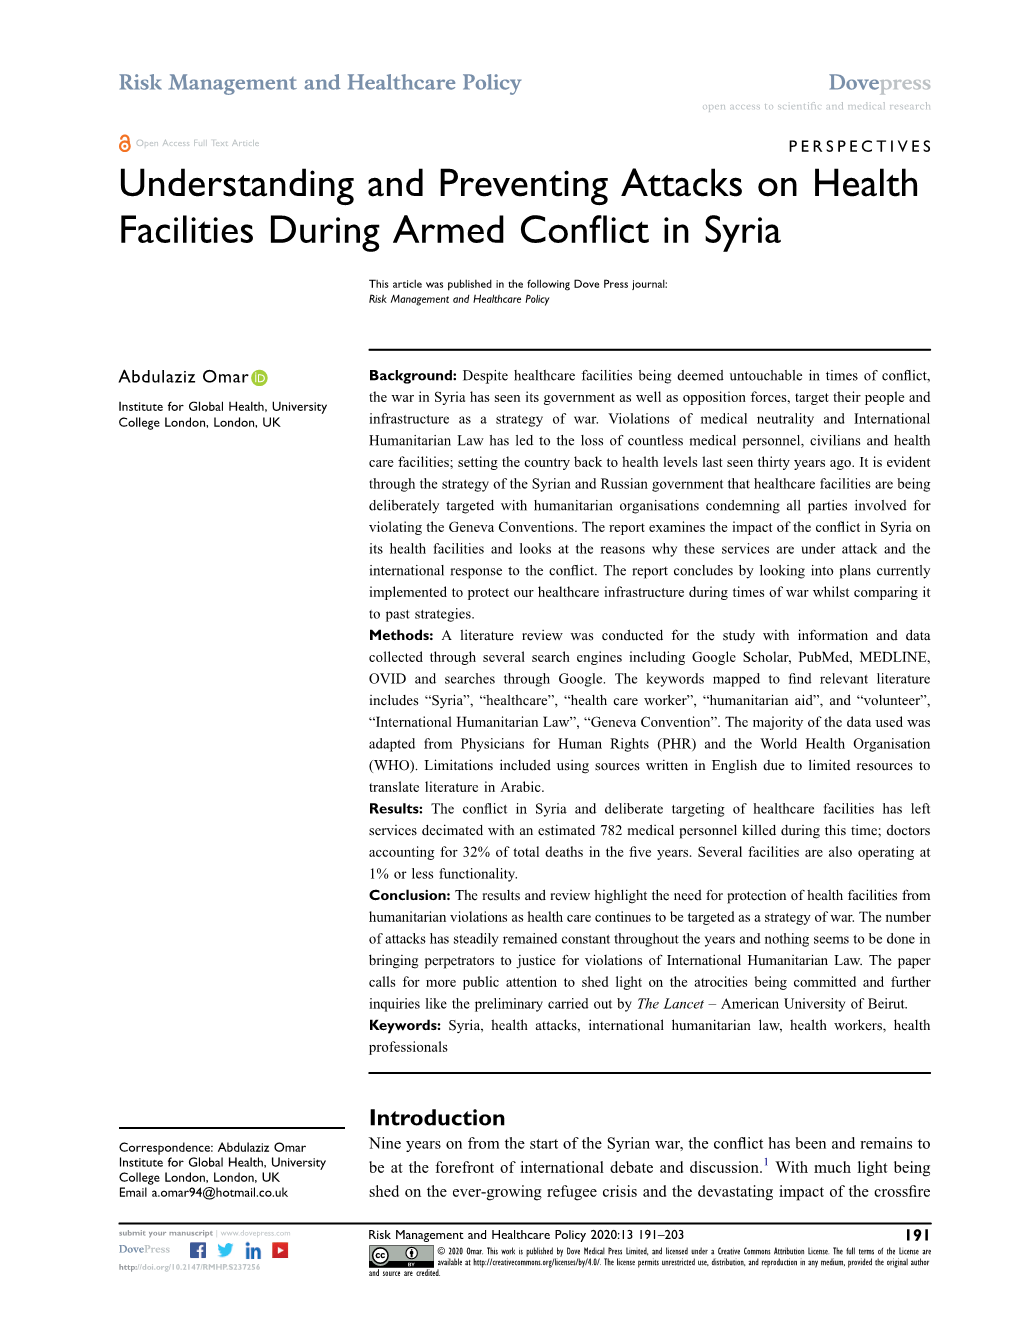 Understanding and Preventing Attacks on Health Facilities During Armed Conflict in Syria